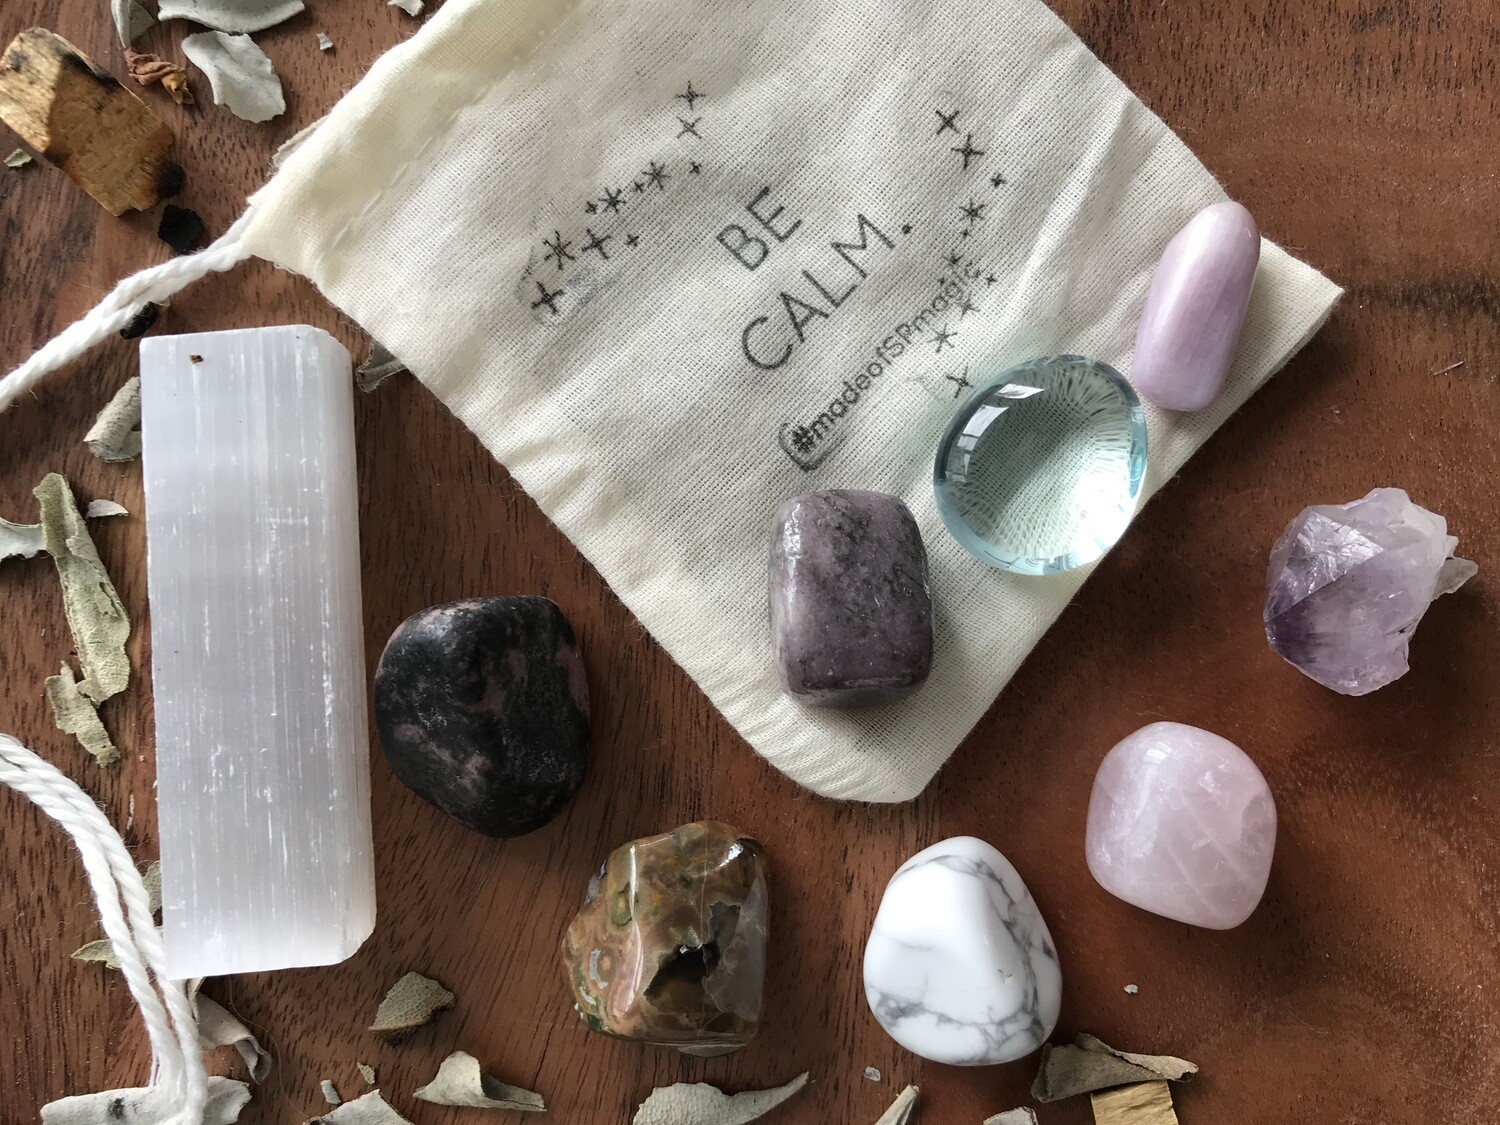 The "Be Calm" Crystal Healing Set